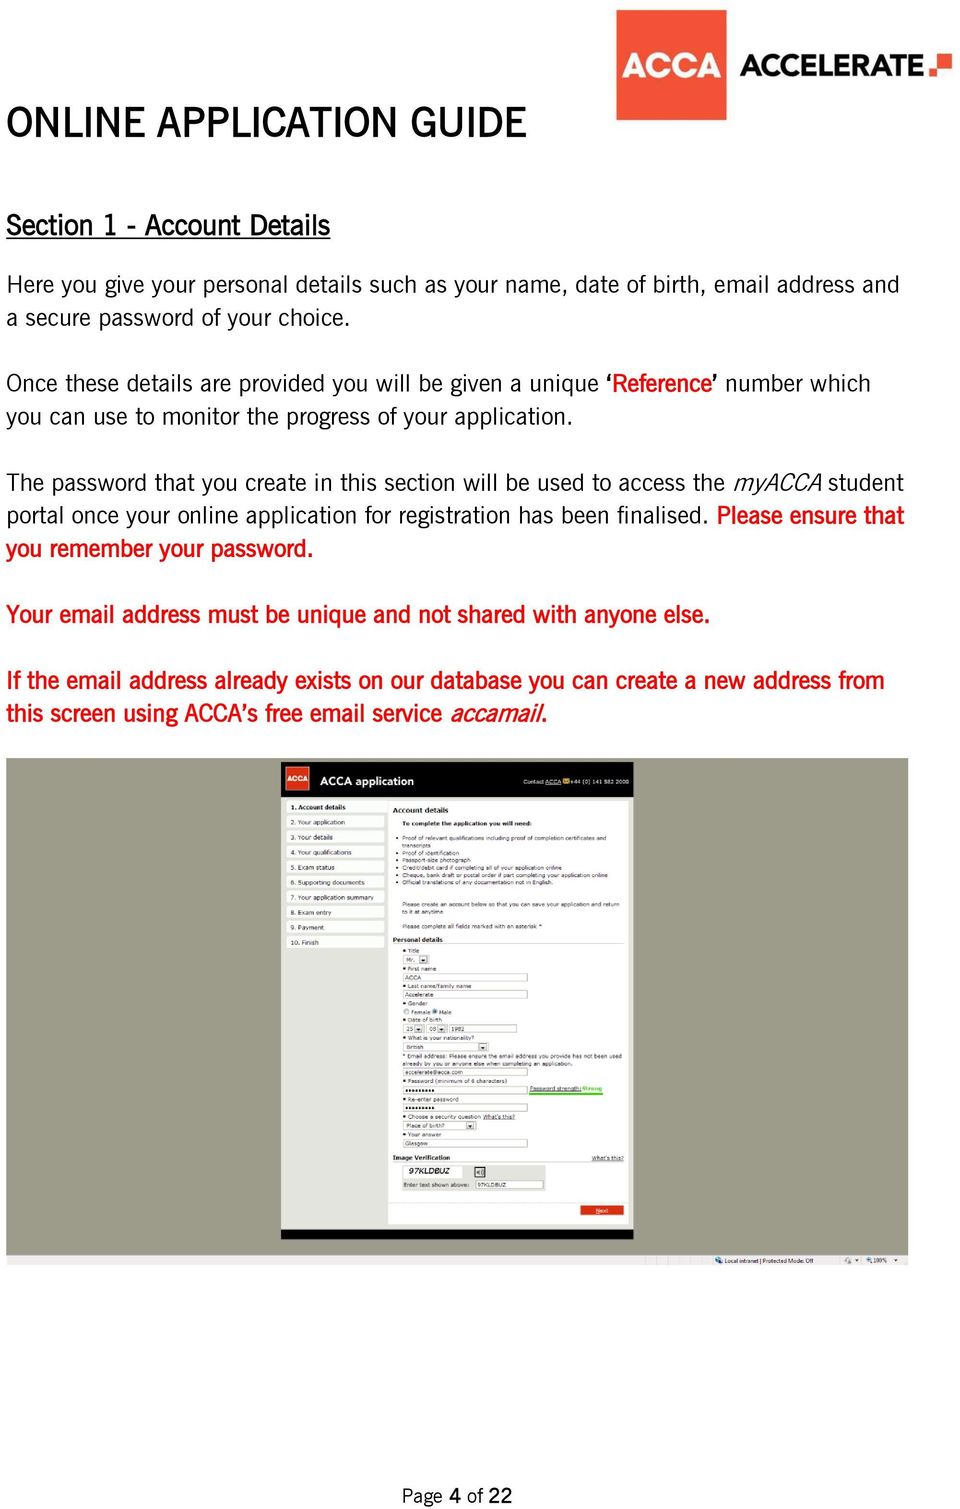 The password that you create in this section will be used to access the myacca student portal once your online application for registration has been finalised.